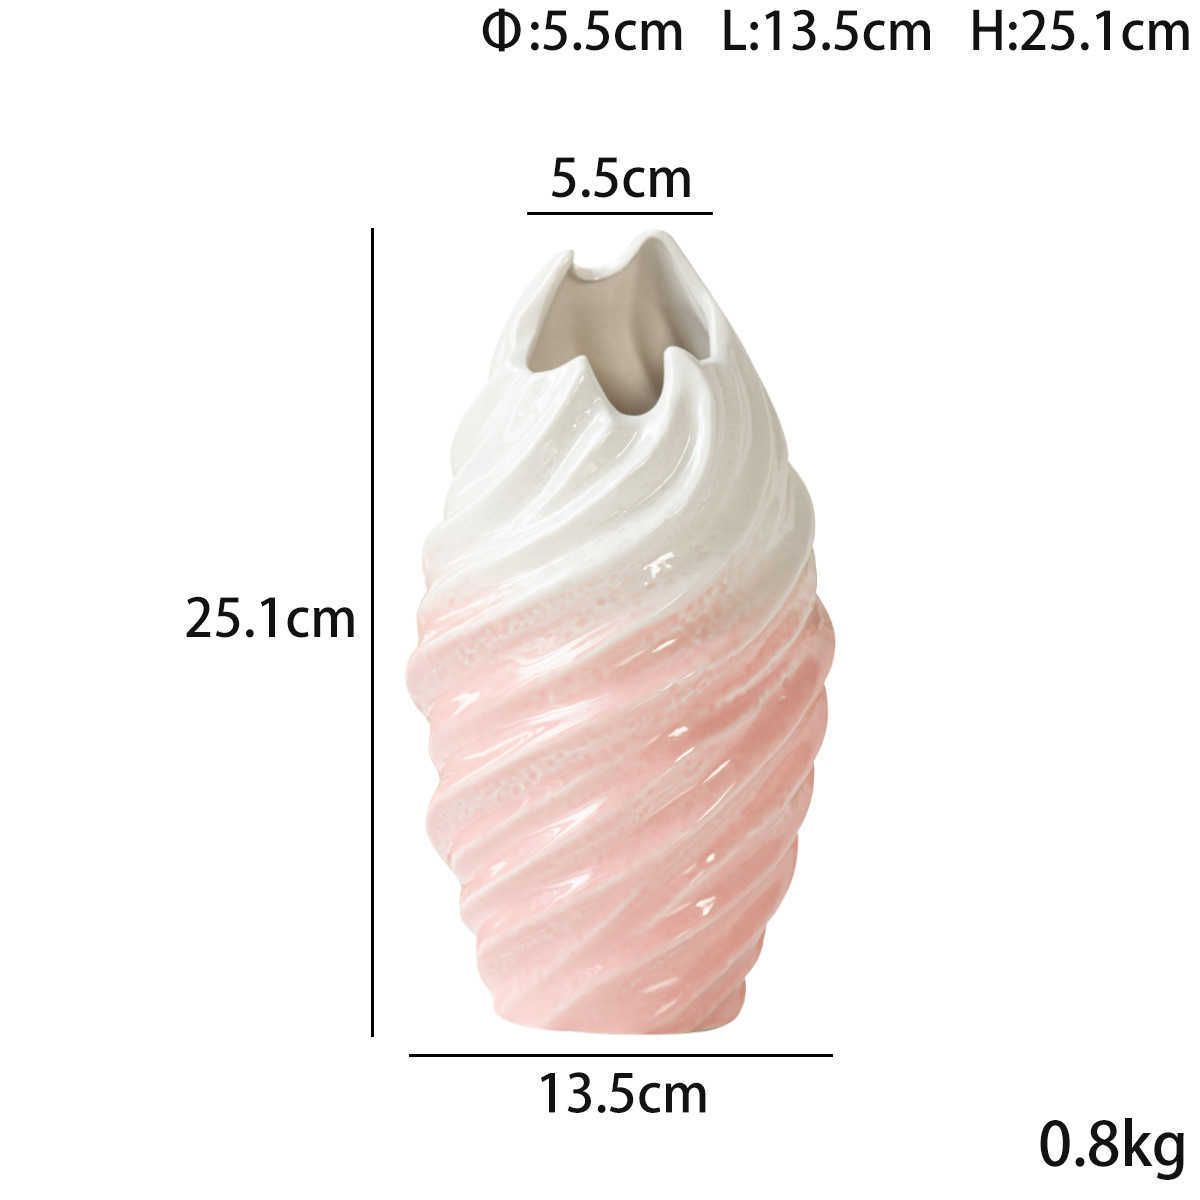 Height 25.1cm-a